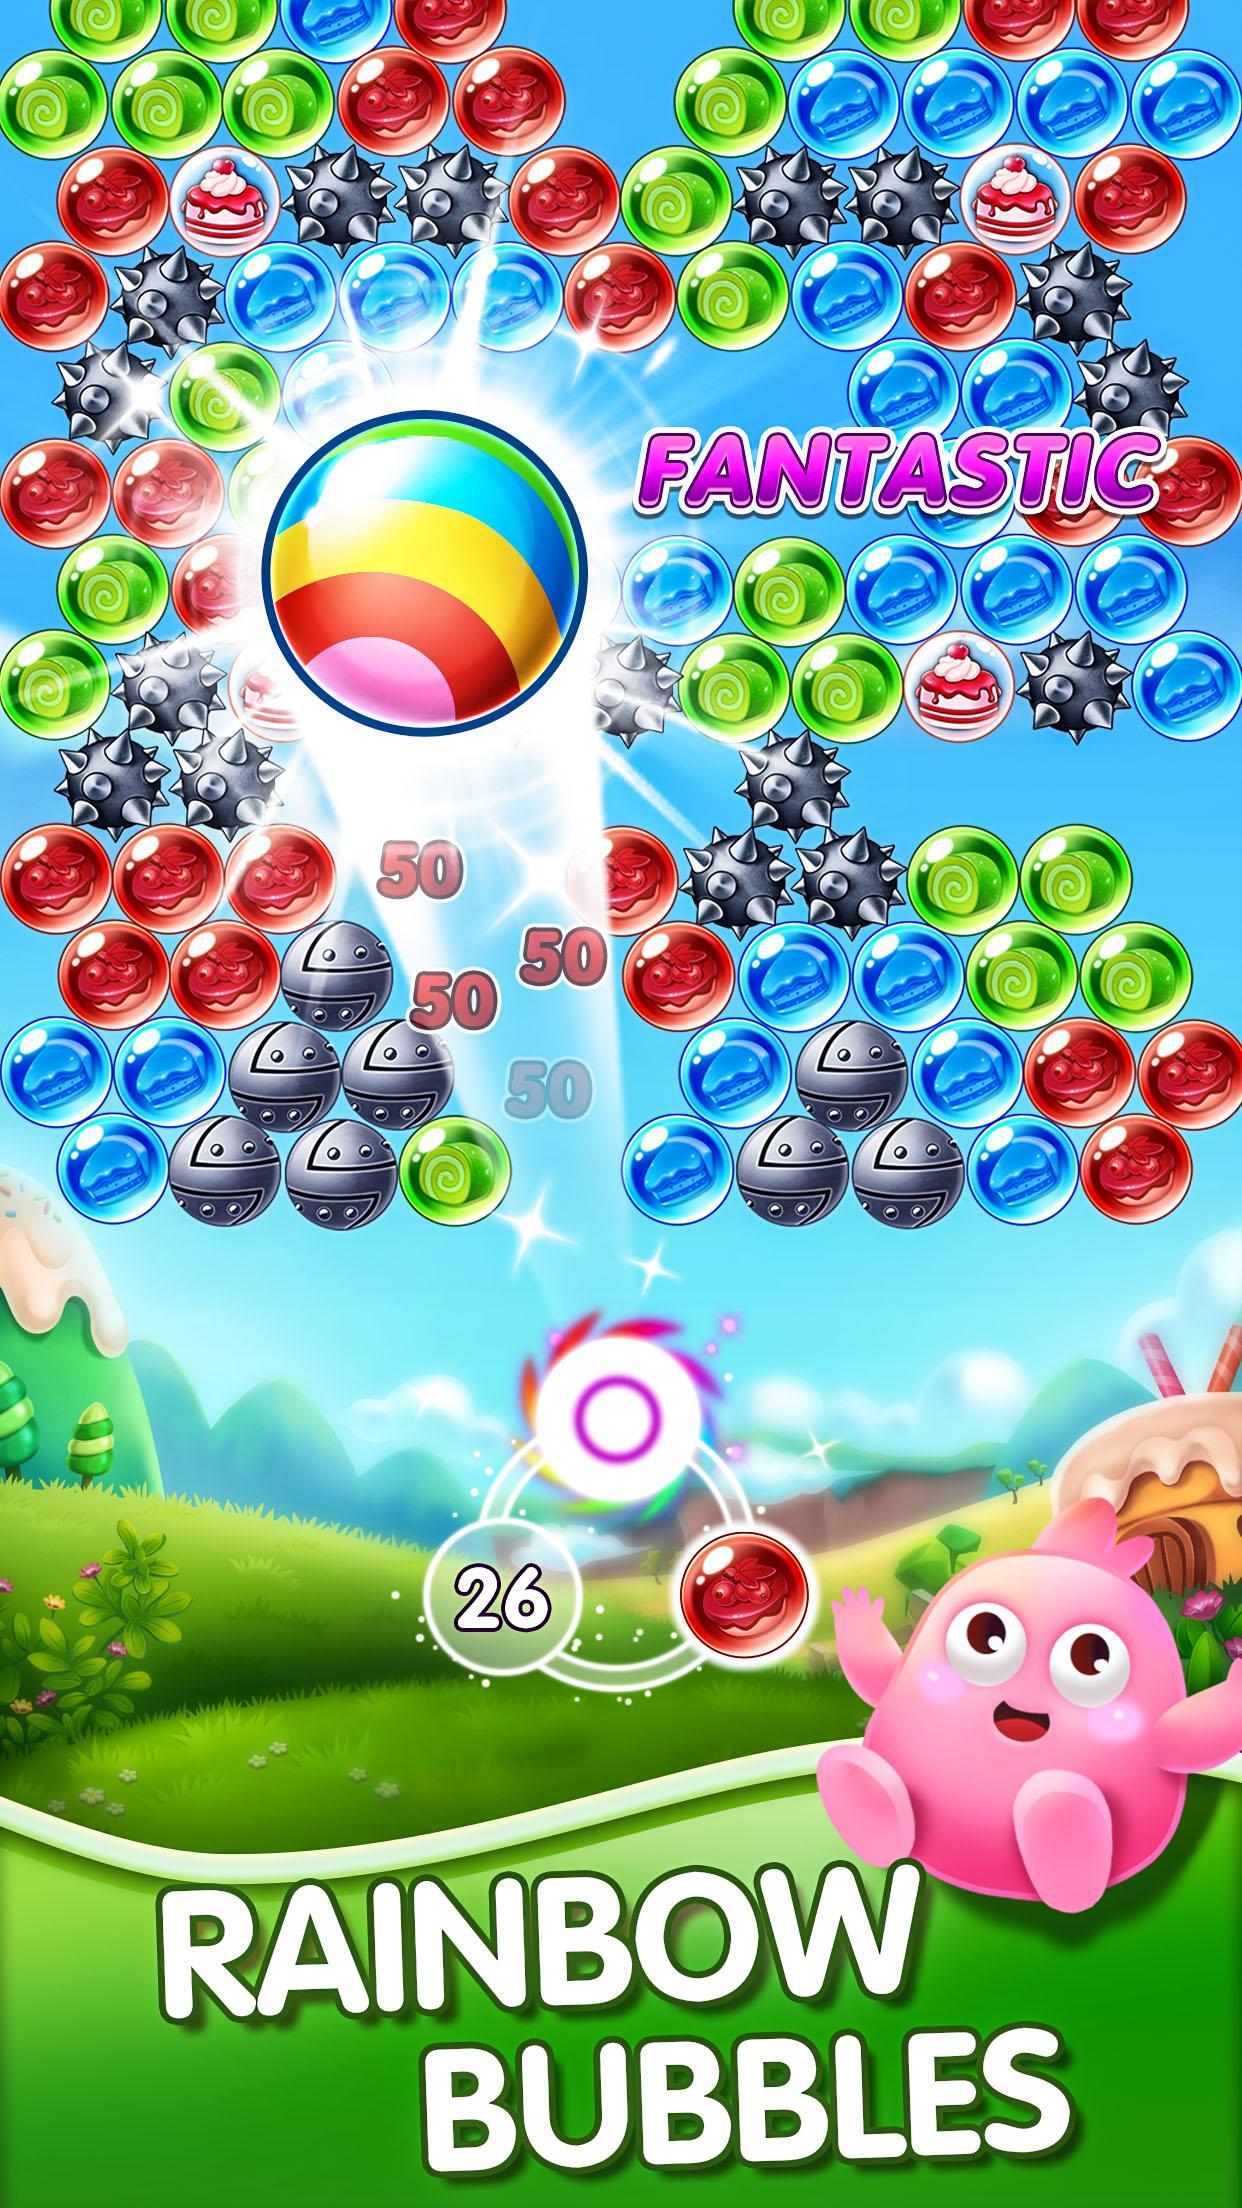 Screenshot 1 of Dolce bolla: sparabolle L 1.0.5